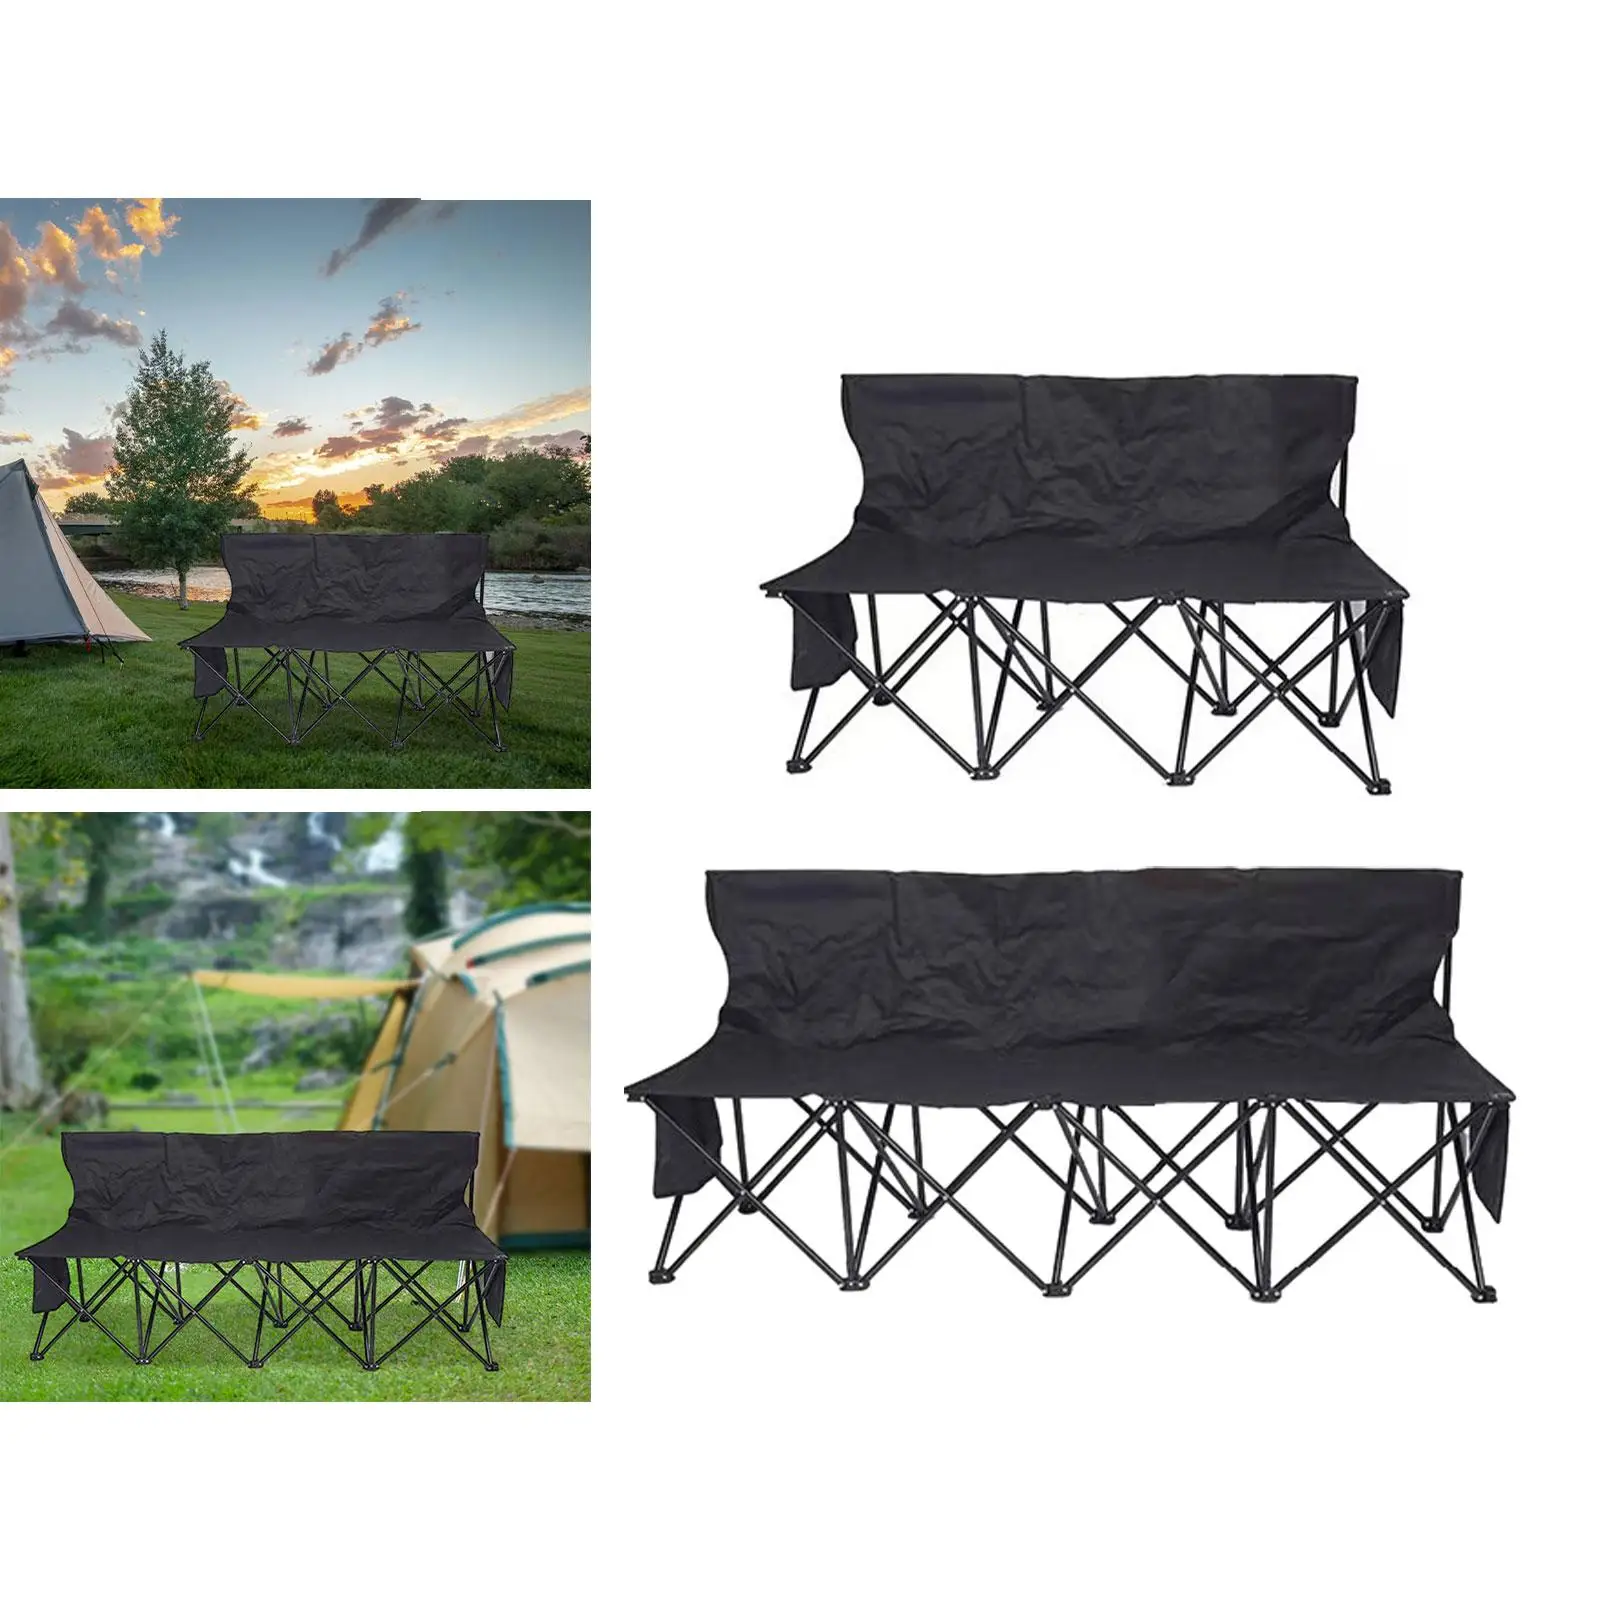 Folding Bench Seating Portable Sports Bench Multi Person with Back Portable Sideline Bench Foldable for Outdoor Beach Sports